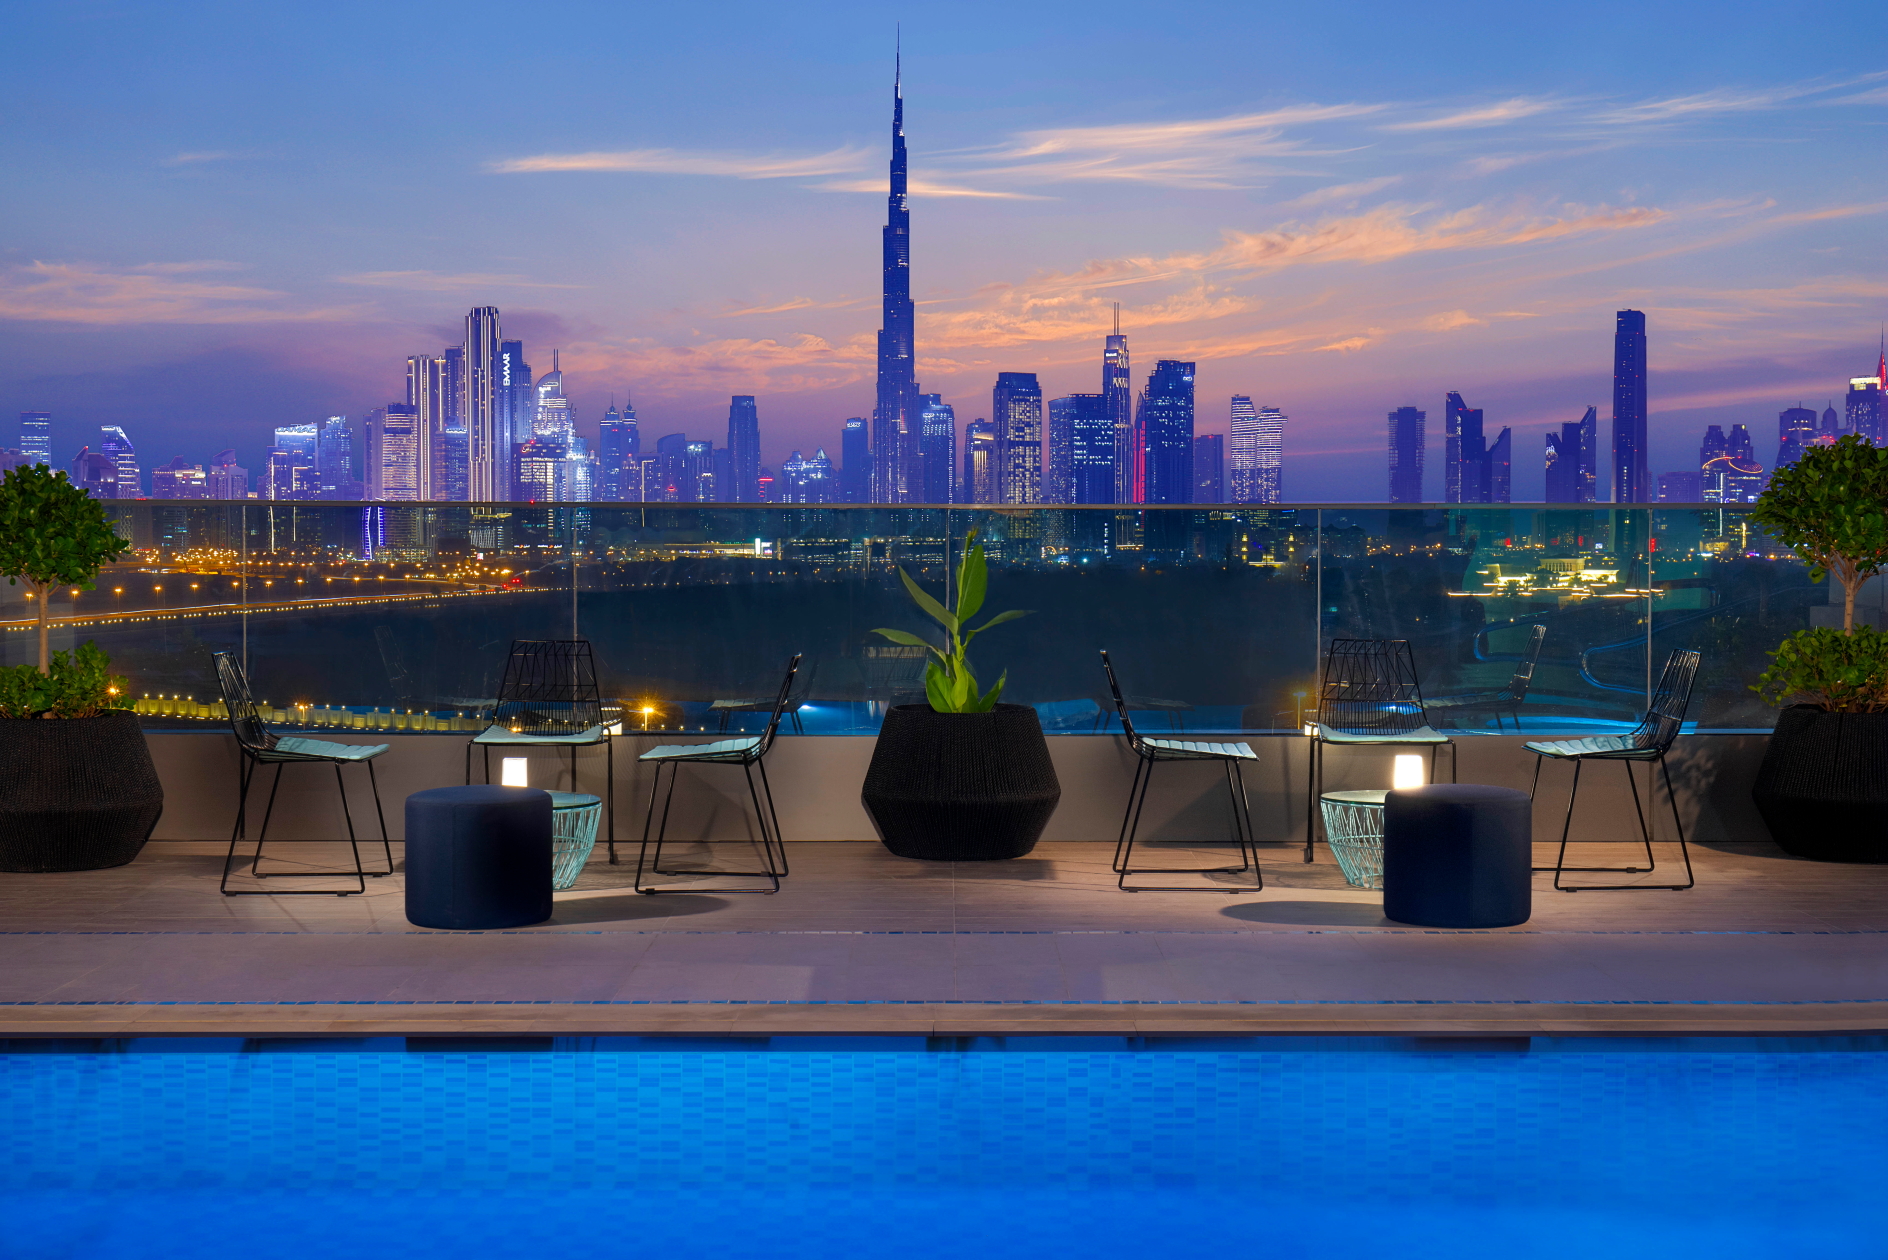 The Residence Inn by Marriott Al Jaddaf not only offers convenient access to key areas of the city, including Downtown Dubai and Business Bay, but also boasts spectacular views of the Burj Khalifa and surrounding cityscape. Click to enlarge.